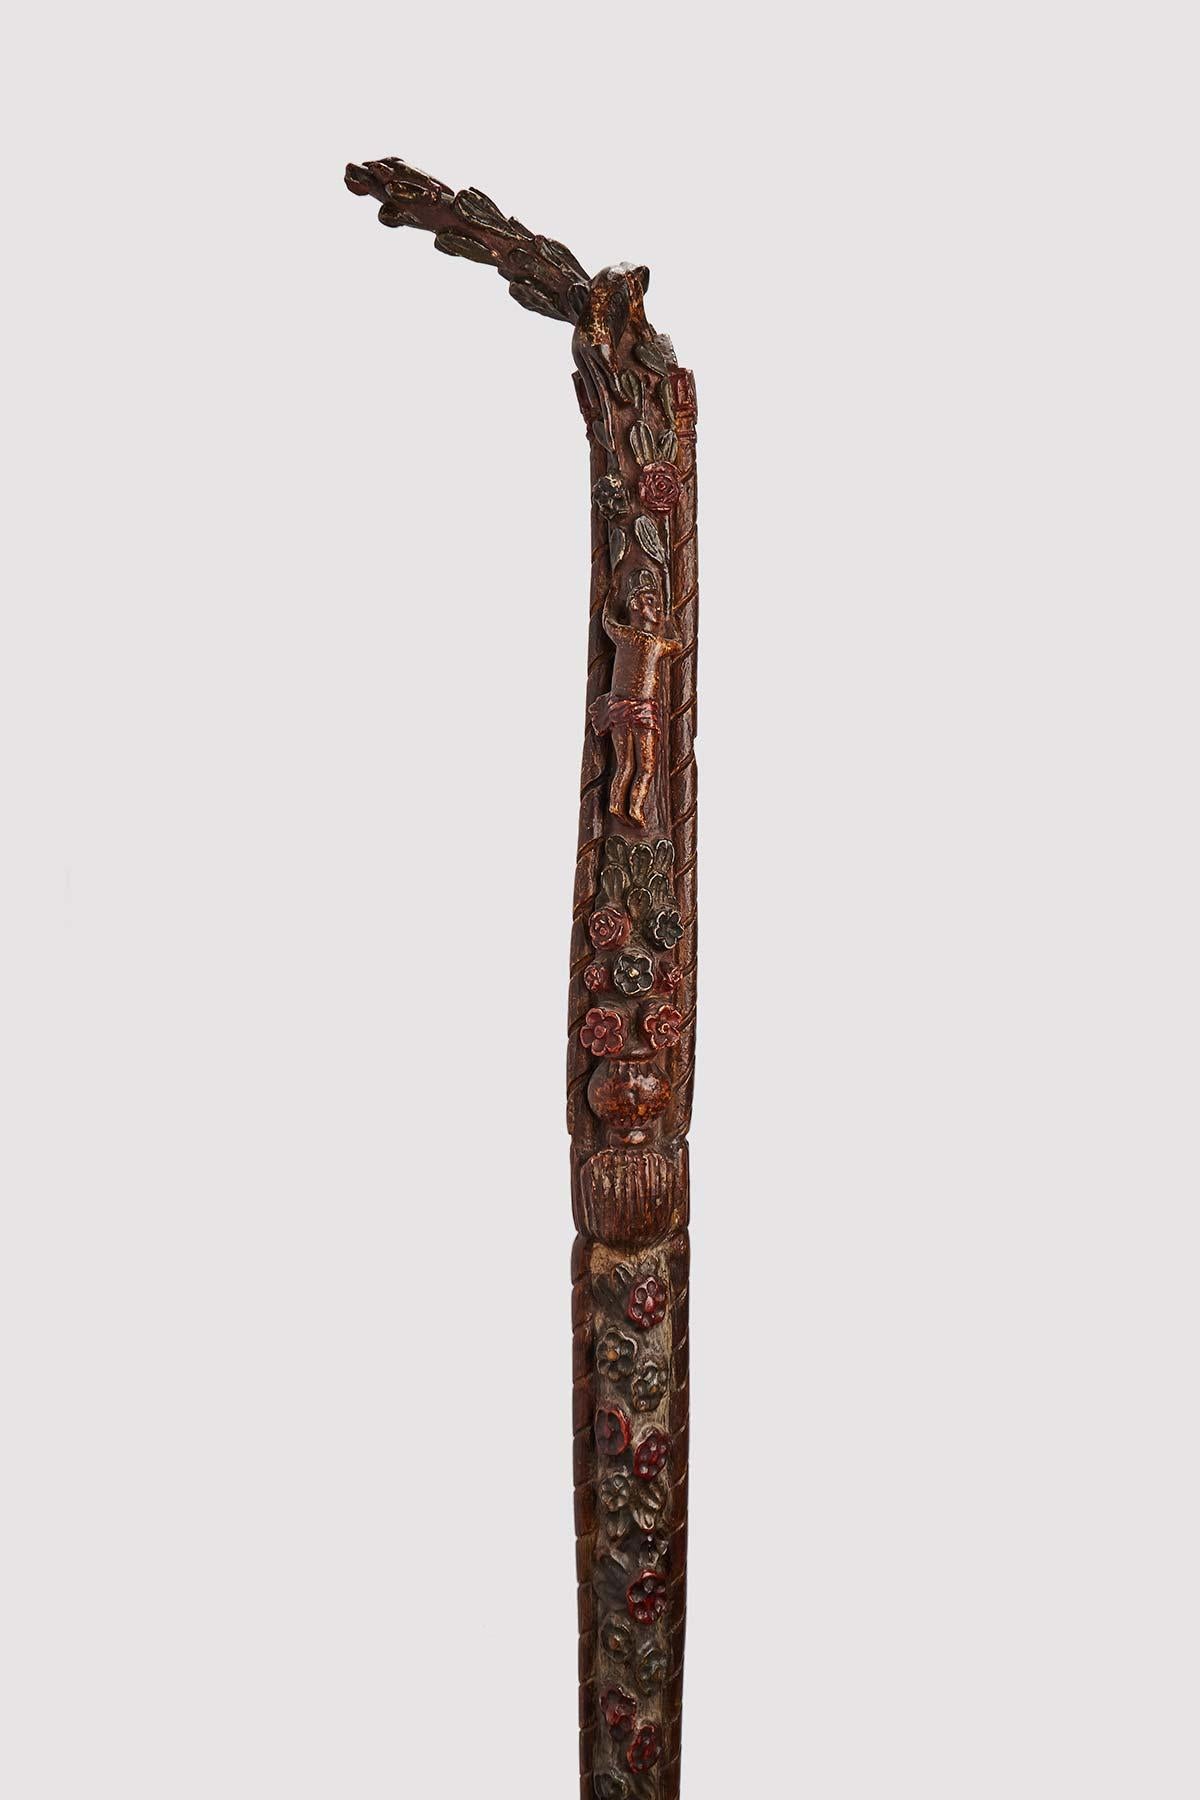 Folk art stick: unique piece of carved and carved wood, very tall, painted burgundy red, depicting flowers and characters. Russia circa 1830.